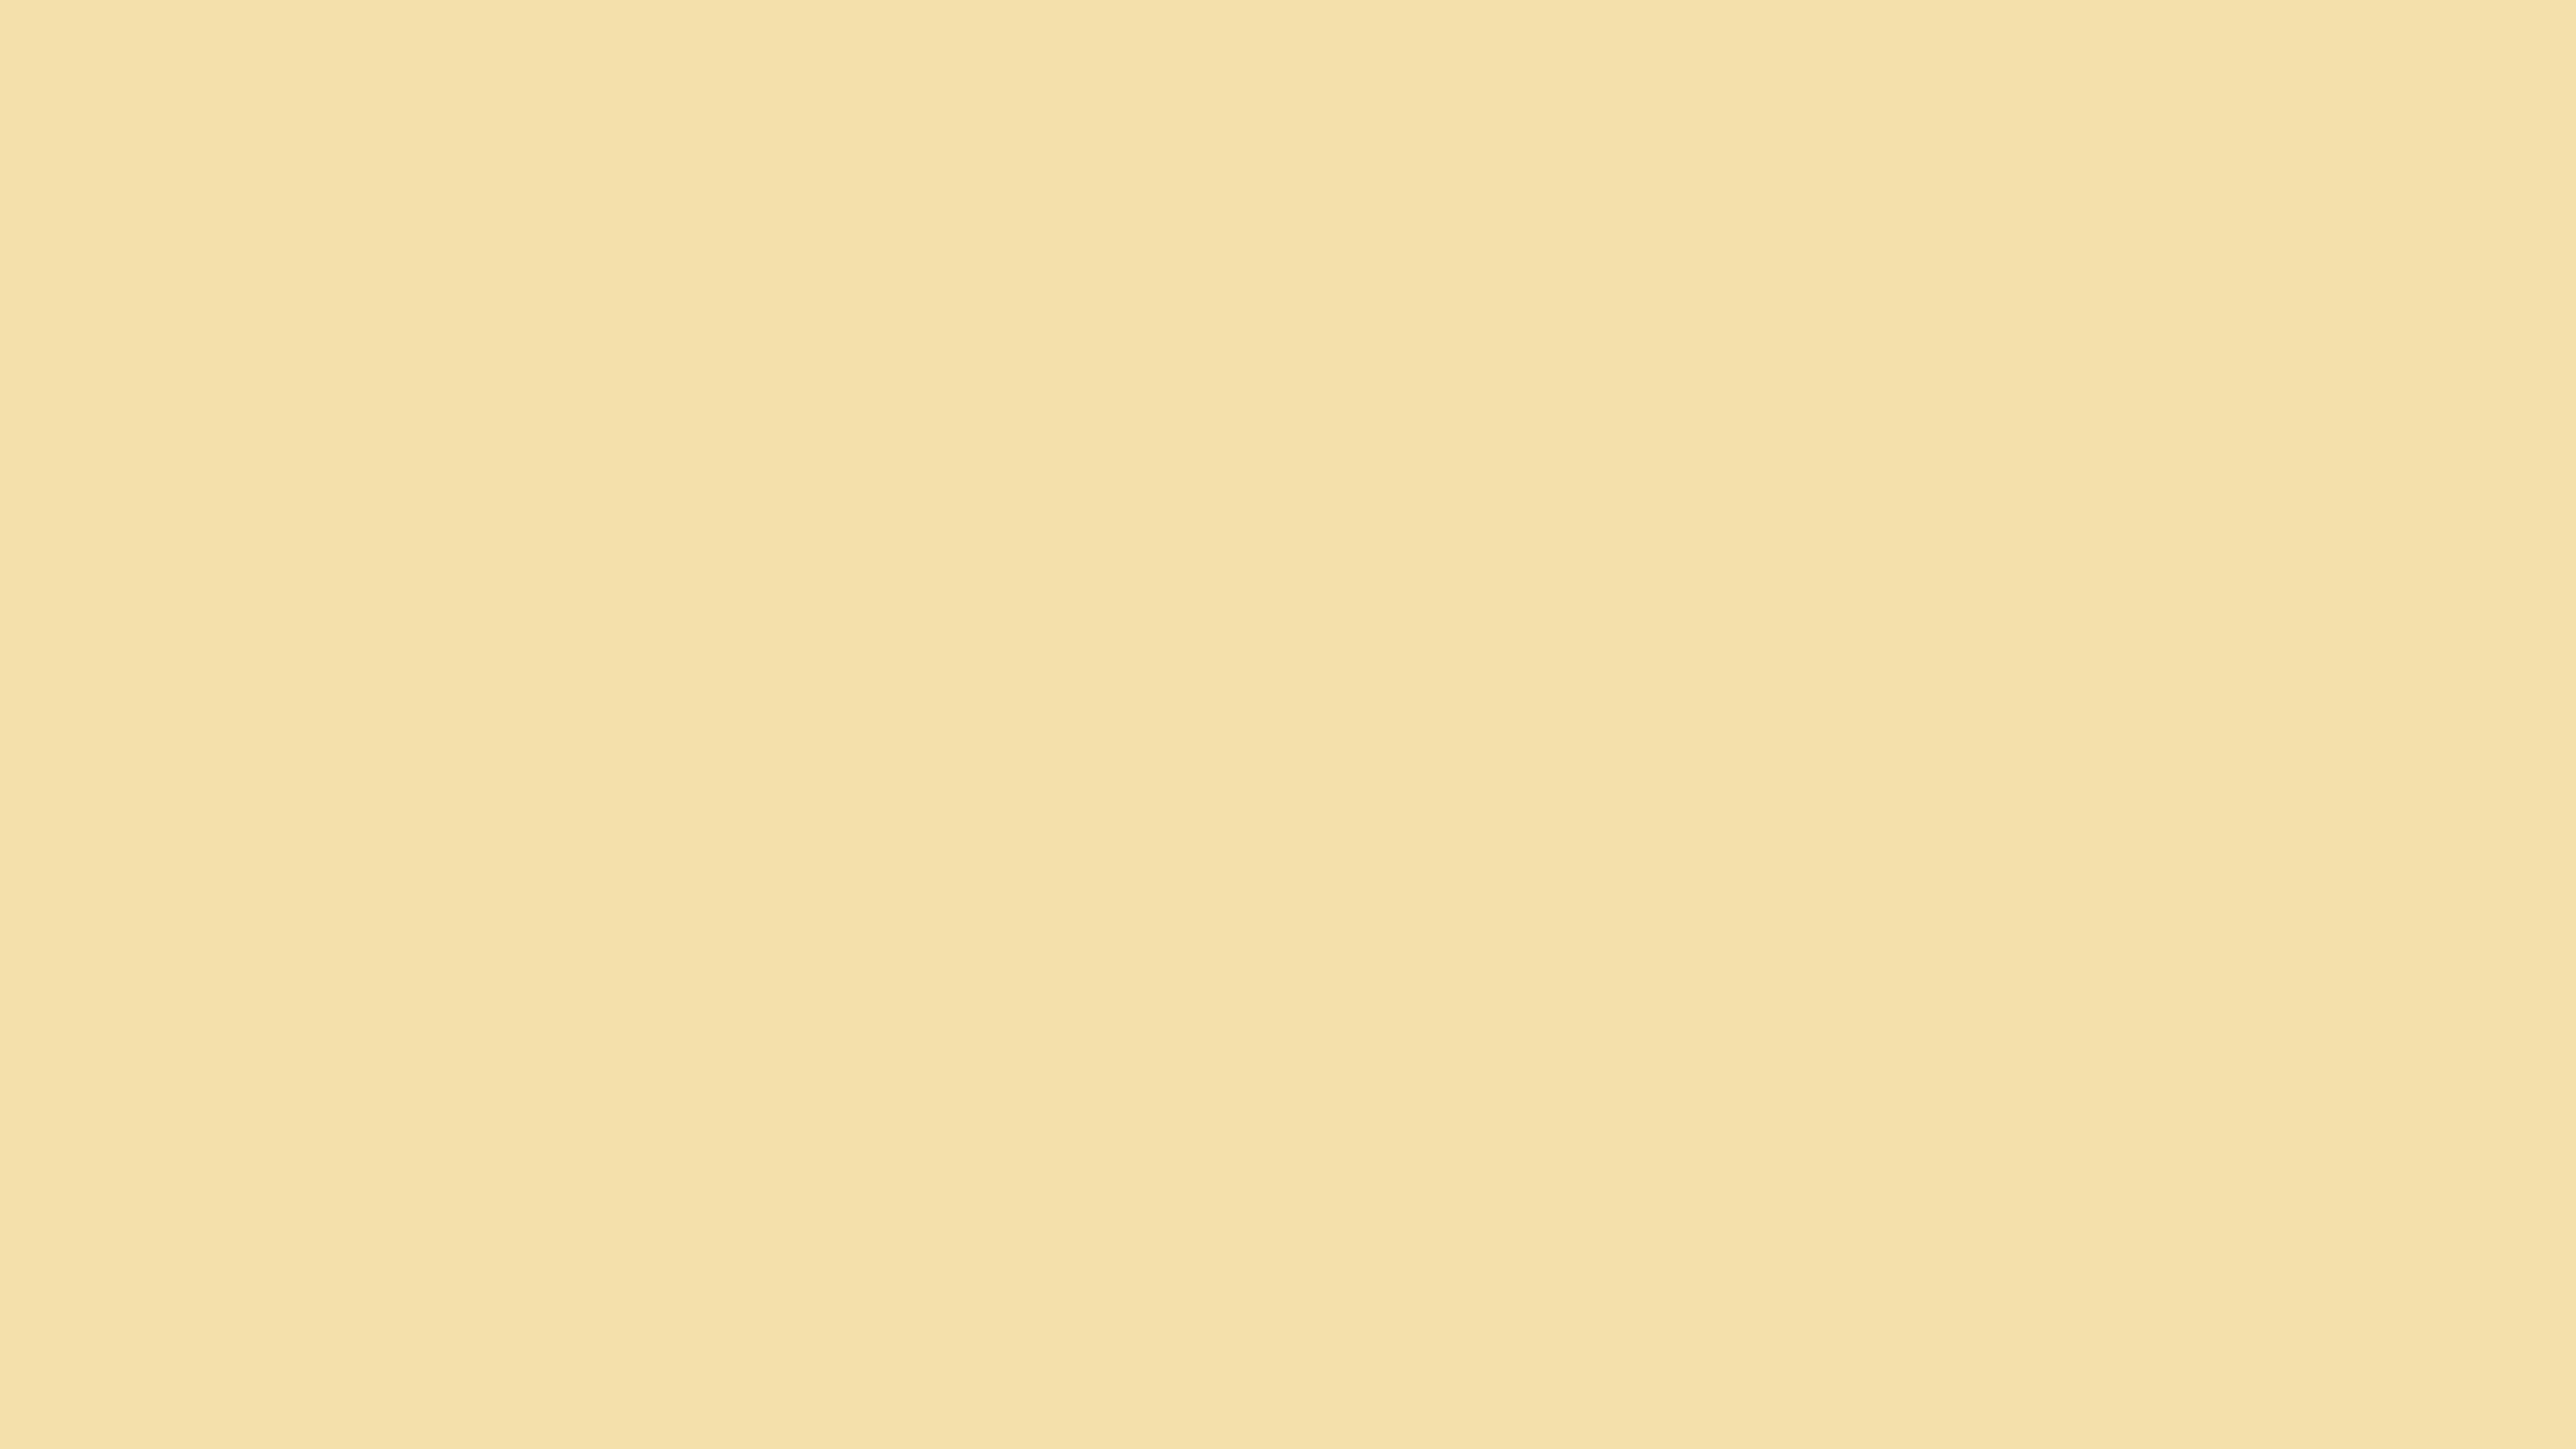 Double Cream Solid Color Background Image | Free Image Generator